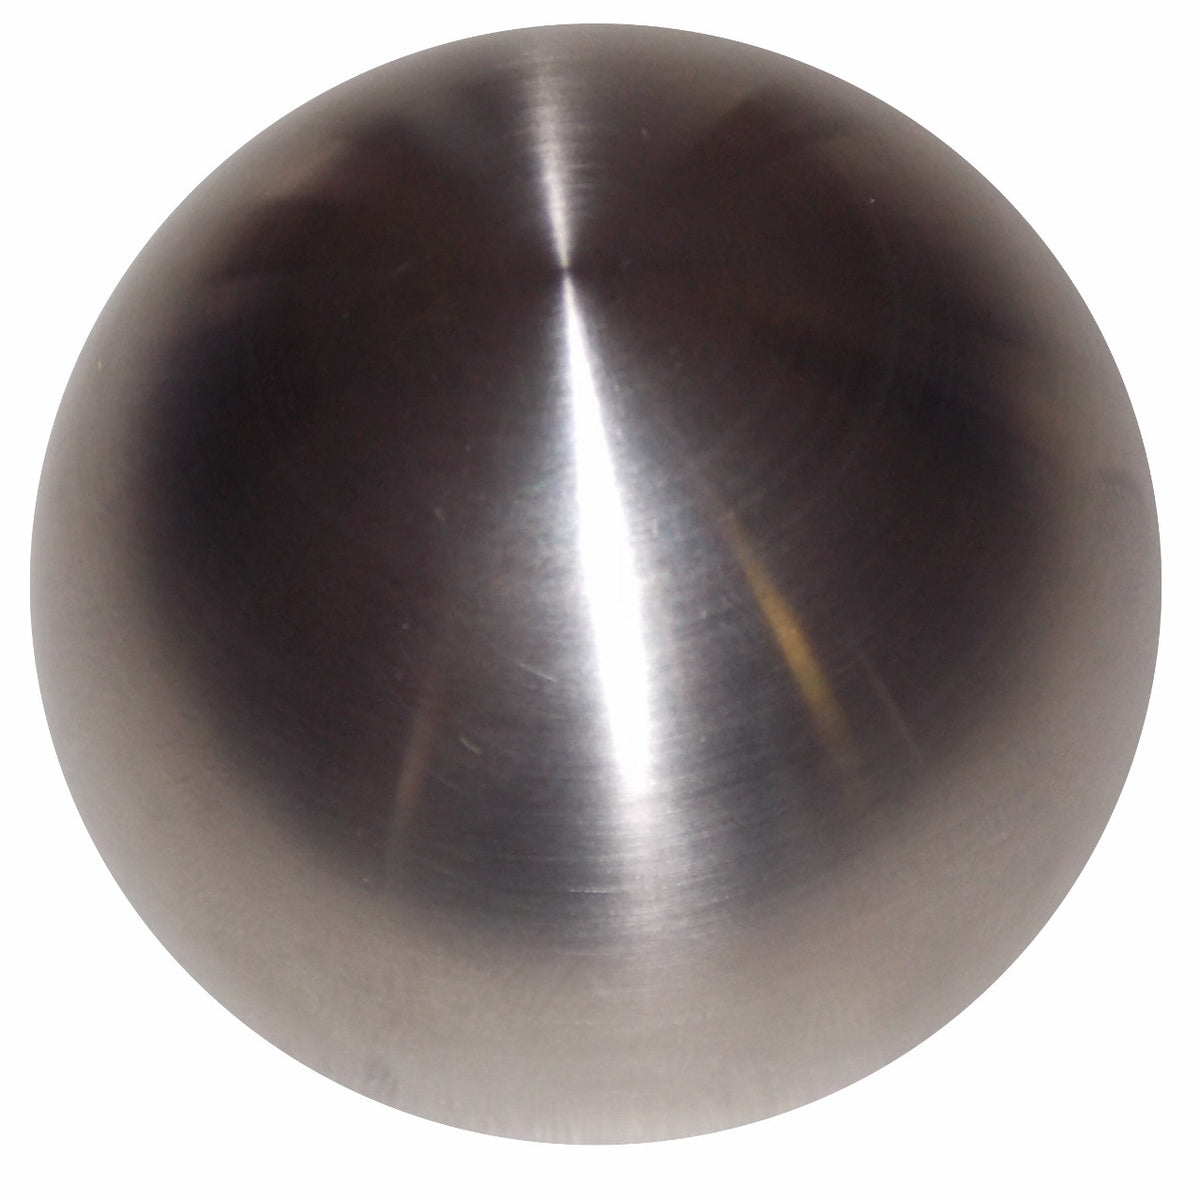 Brushed Stainless Steel C5 Corvette Heavy Weight Shift Knob